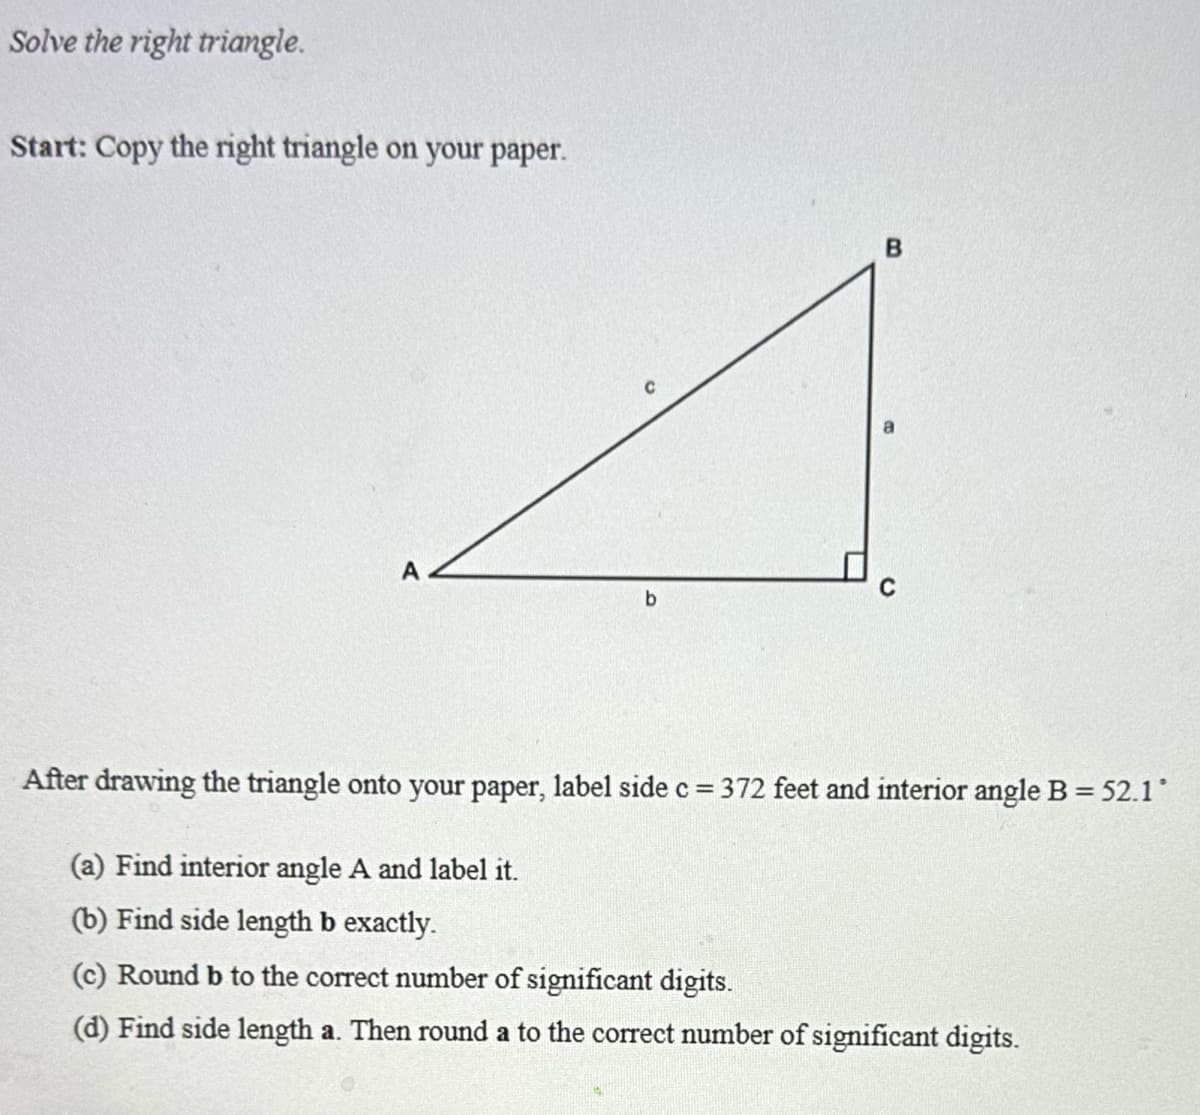 Solve the right triangle.
Start: Copy the right triangle on your paper.
b
After drawing the triangle onto your paper, label side c = 372 feet and interior angle B = 52.1°
(a) Find interior angle A and label it.
(b) Find side length b exactly.
(c) Round b to the correct number of significant digits.
(d) Find side length a. Then round a to the correct number of significant digits.